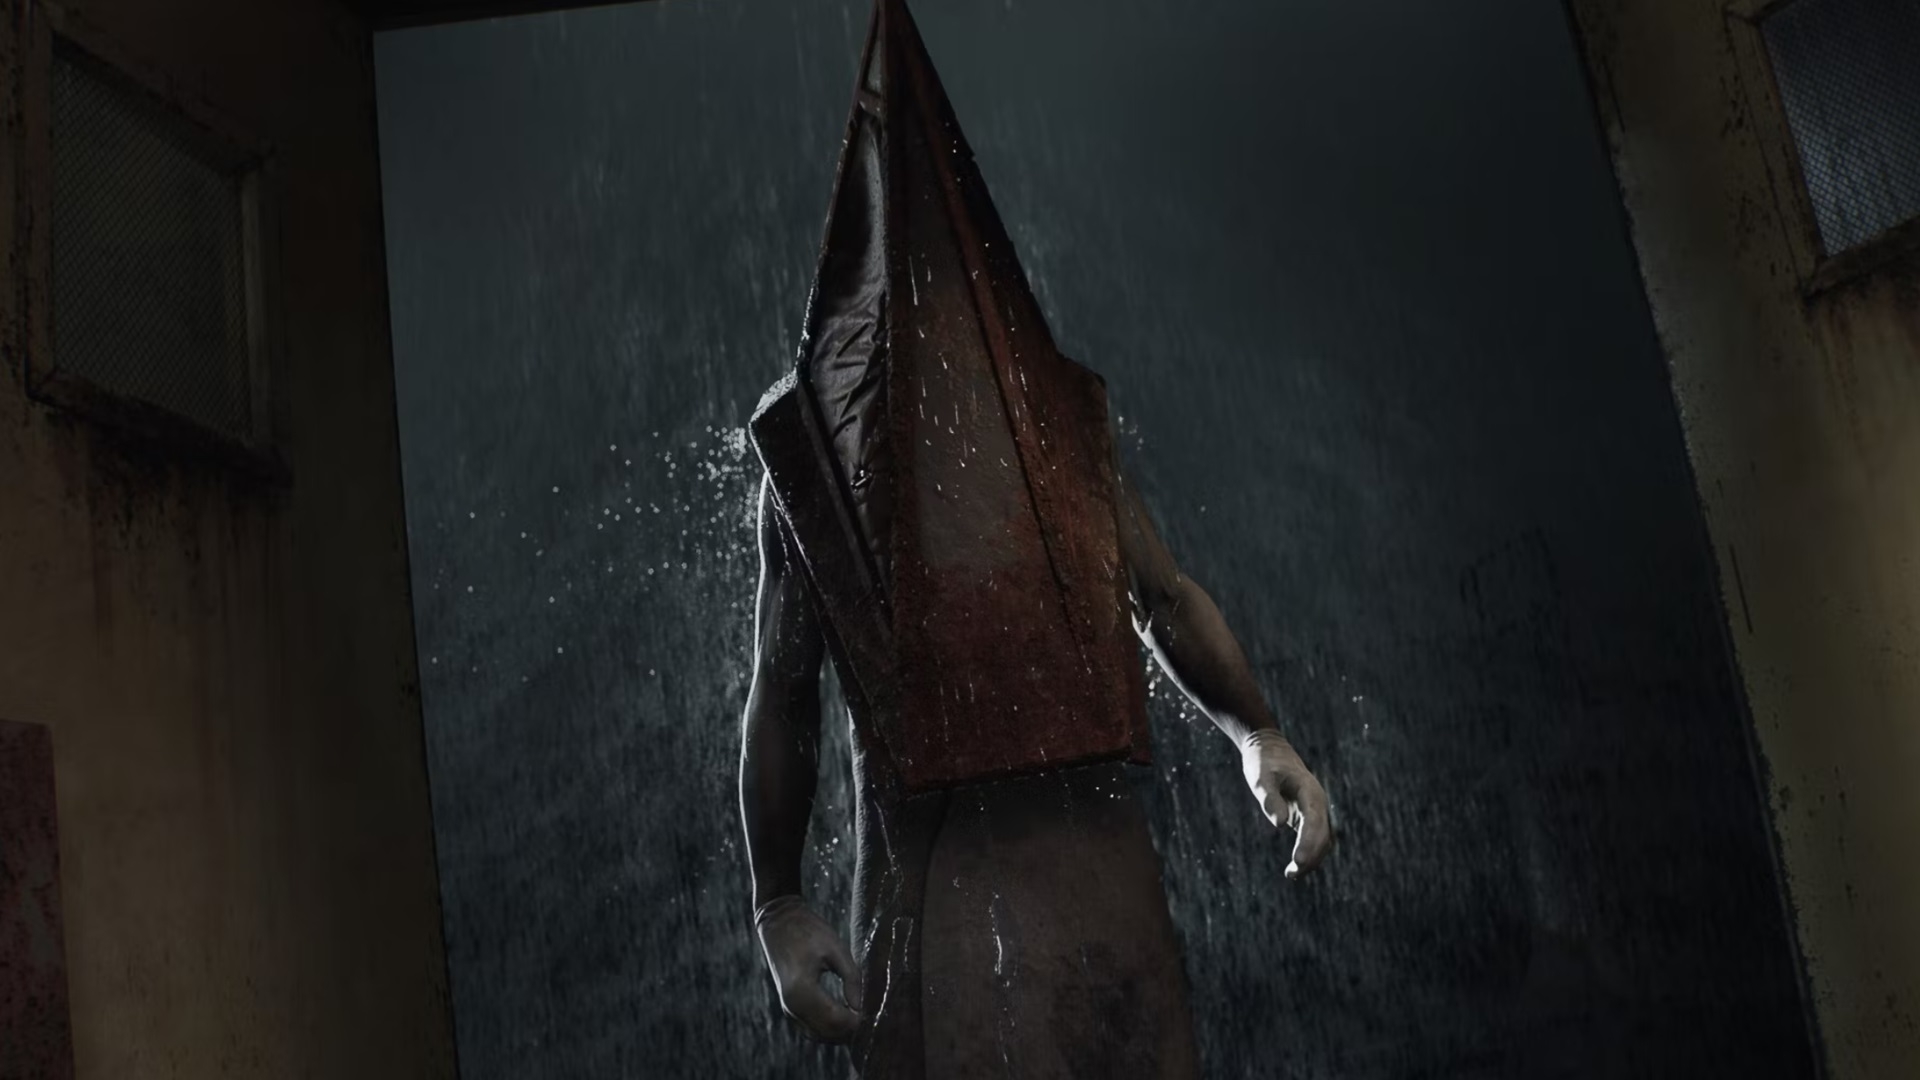 Silent Hill 2 Remake Preorders Appear for Online Stores